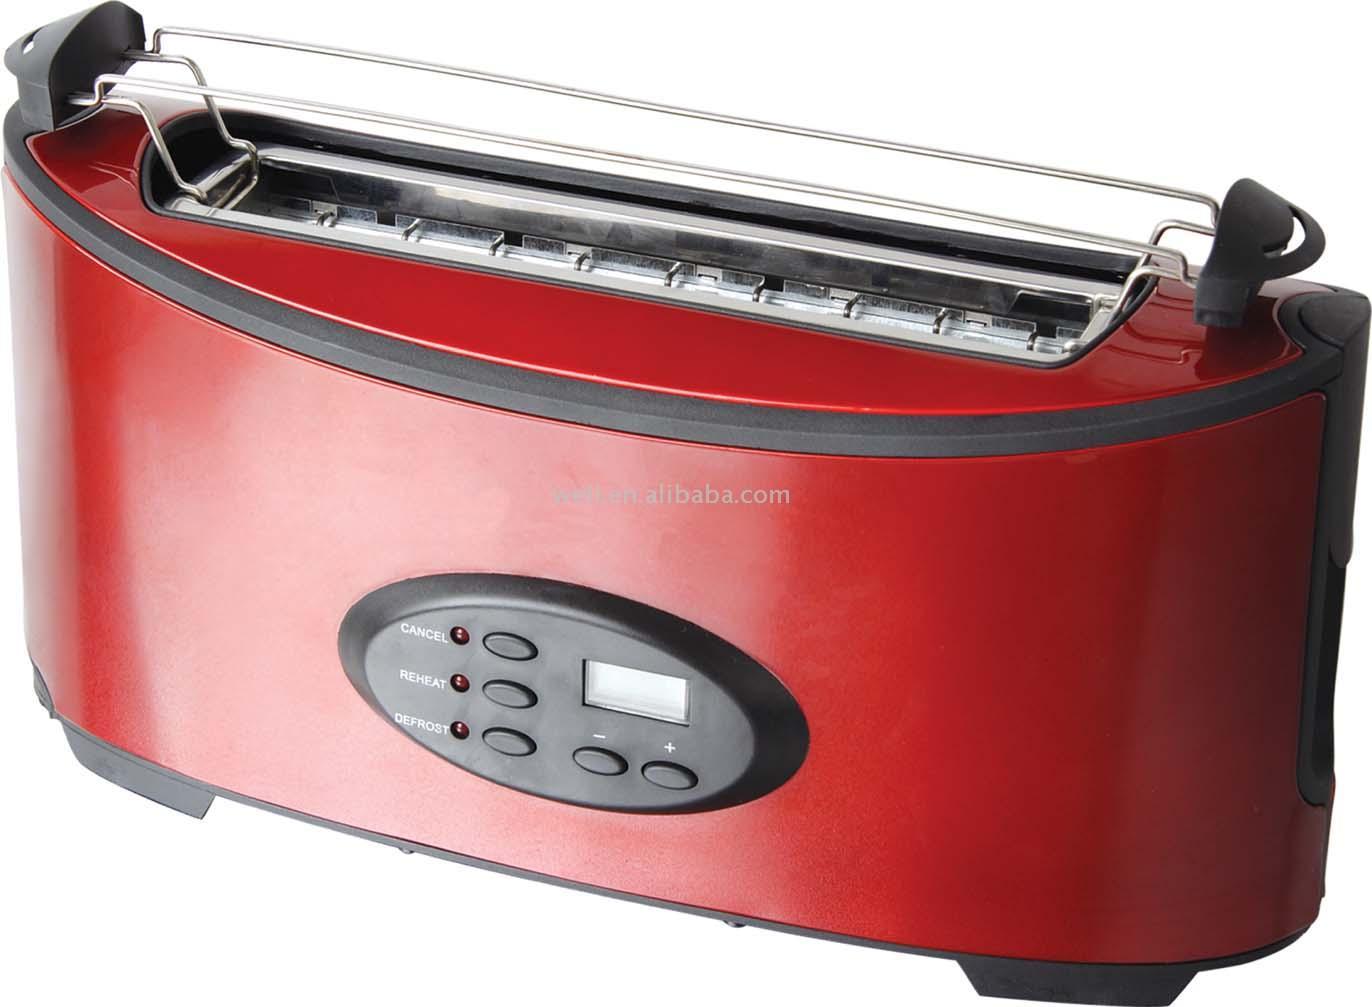  Electric S/S Pop-Up Toaster (Electric S / S Pop-Up-Toaster)